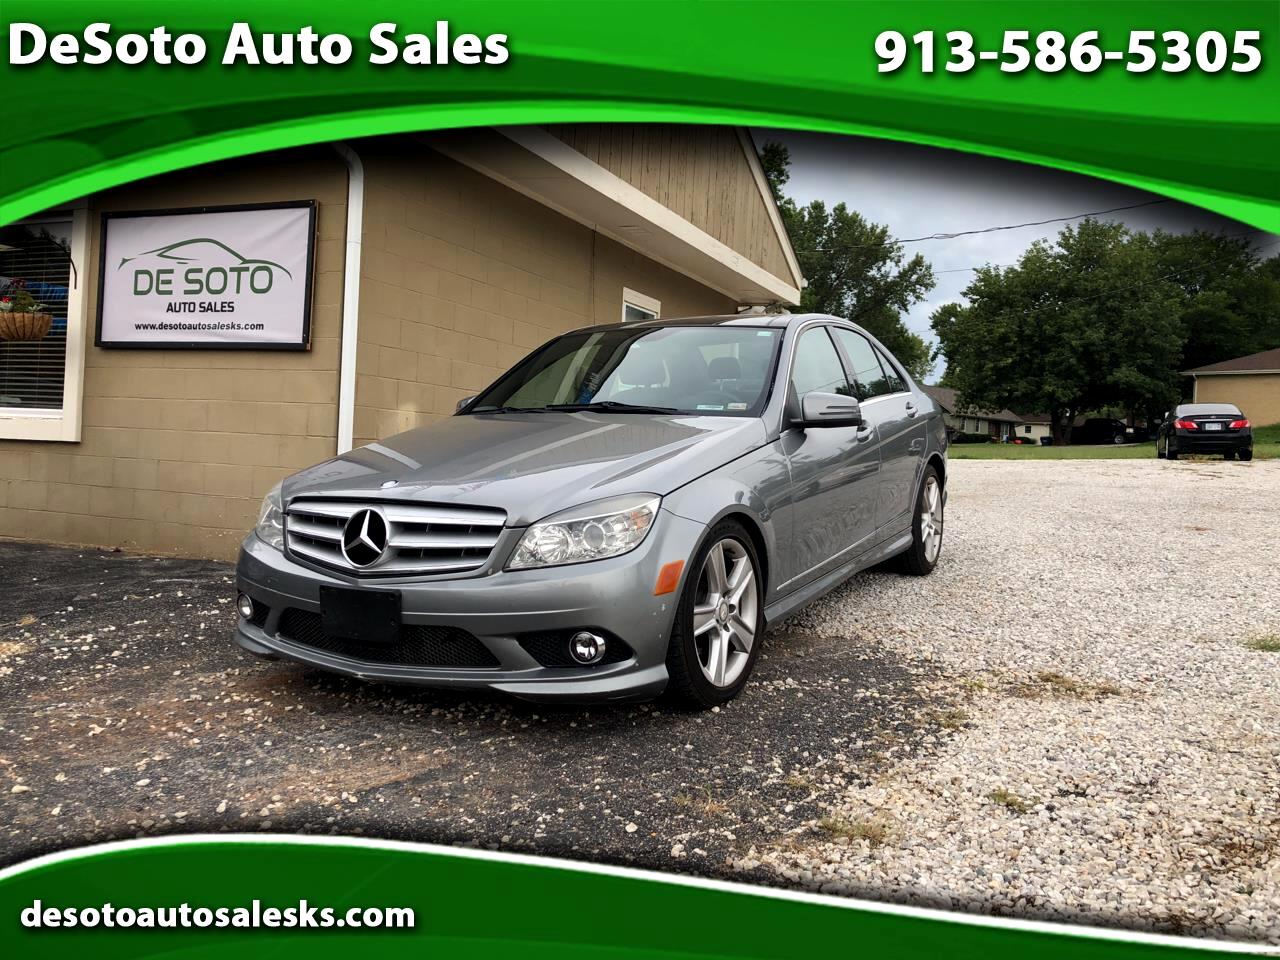 Used 2010 Mercedes Benz C Class C 300 Luxury 4matic For Sale